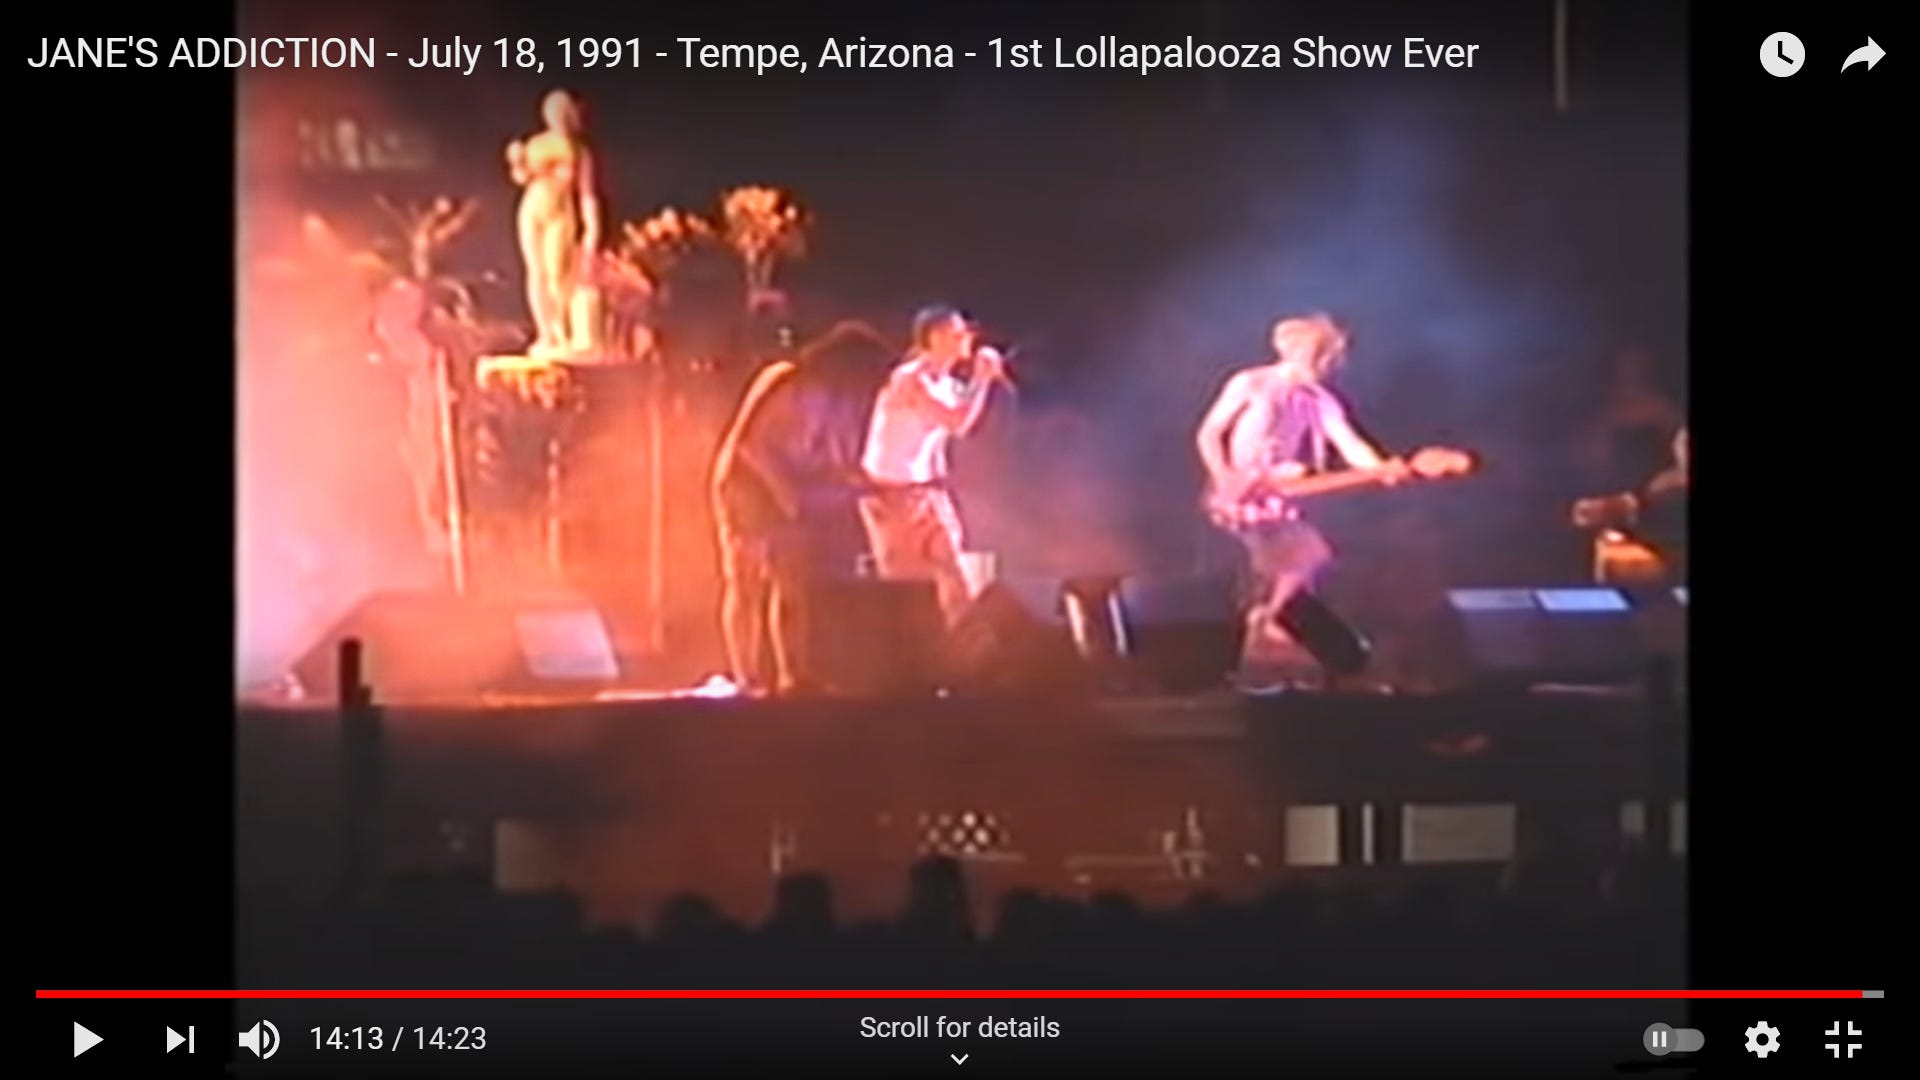 Lollapalooza: The First Show of the First Tour